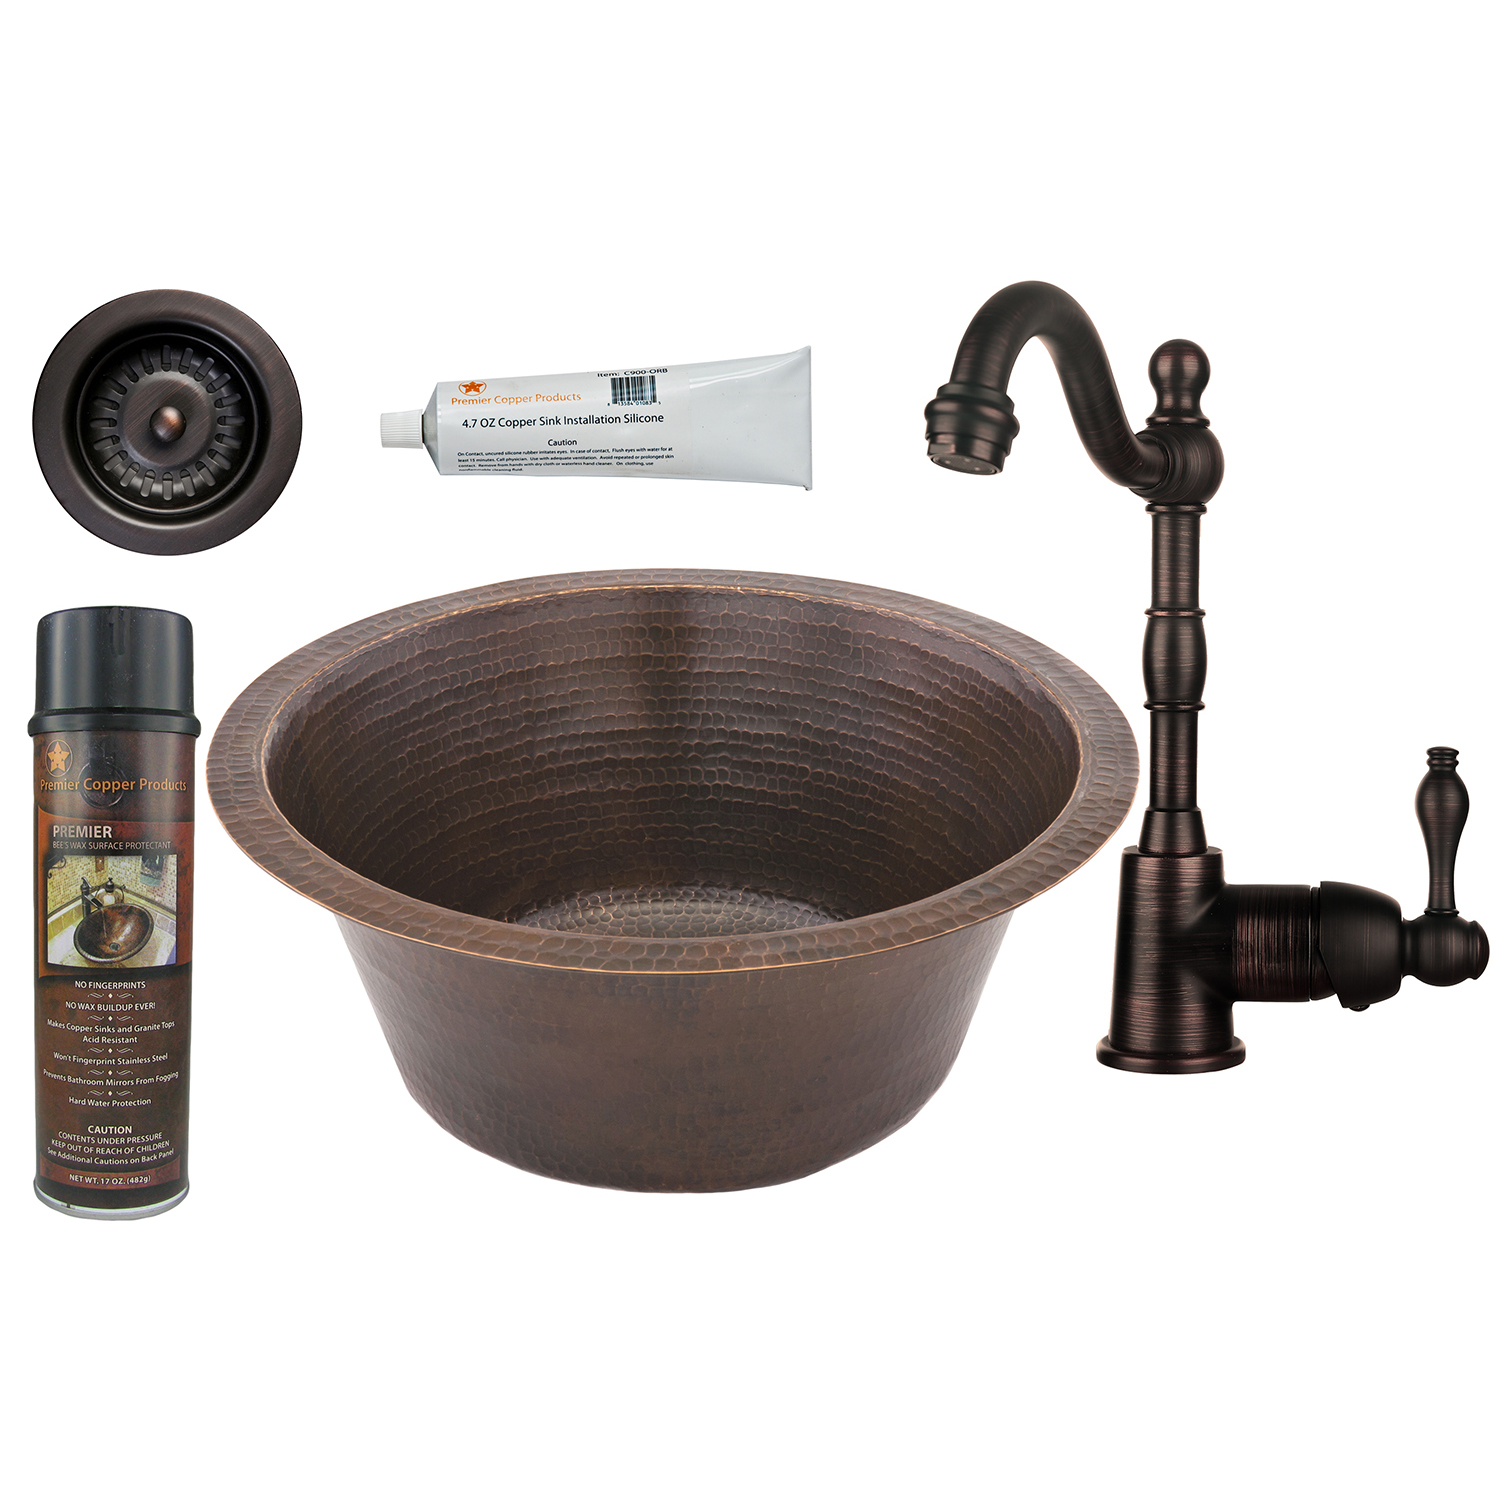 16 Inch Round Hammered Copper Prep Sink With 3.5 Inch Drain Size, Faucet And Accessories Package, Oil Rubbed Bronze